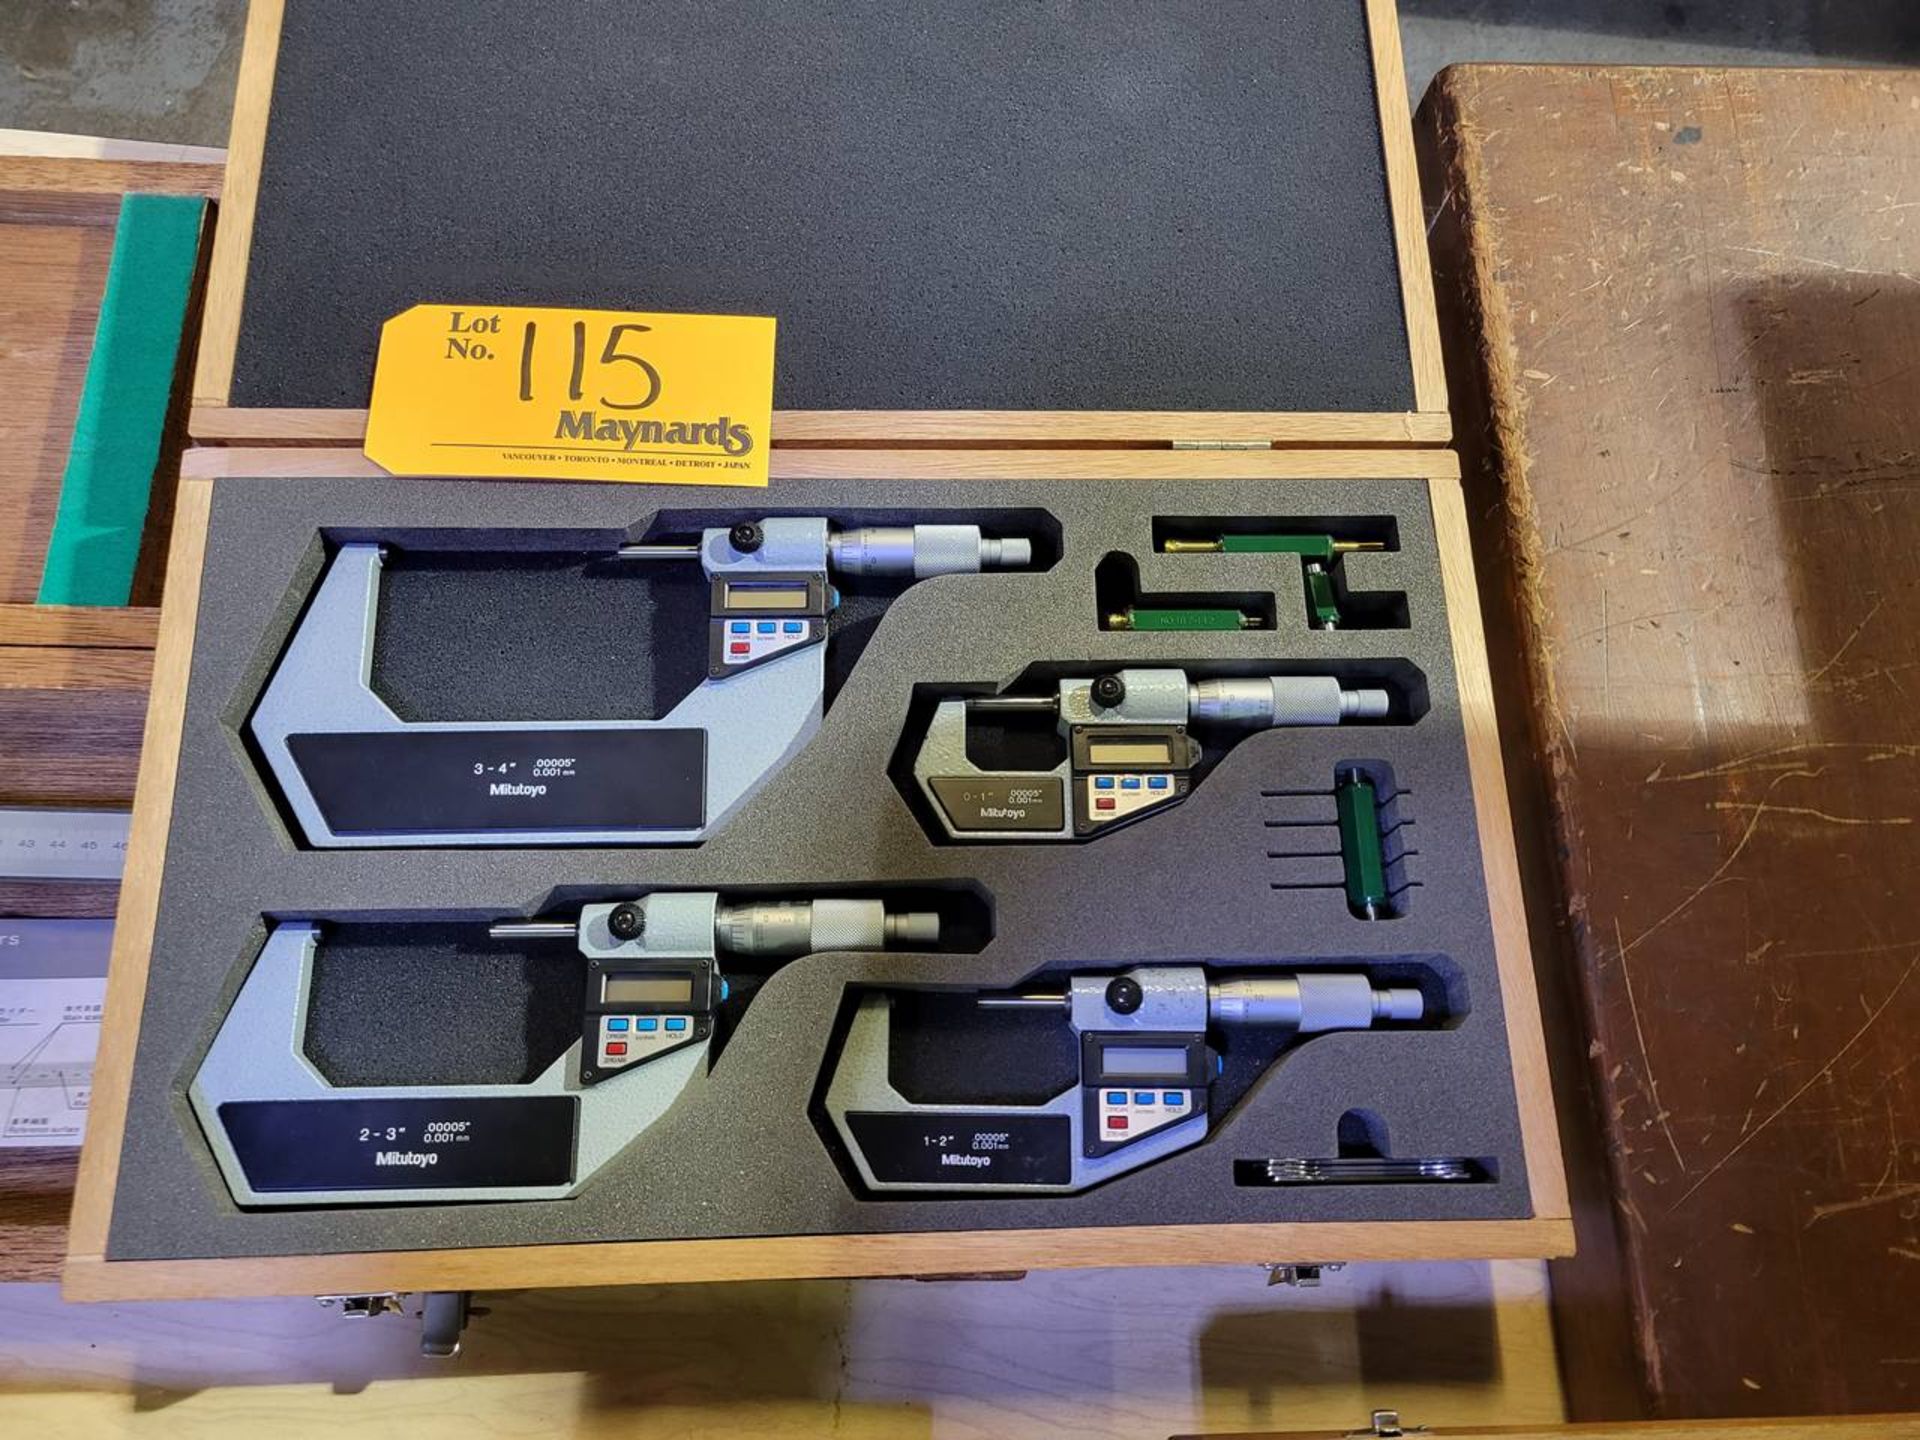 Mitutoyo 4pc Digital OD Micrometer set, 0-4", with case